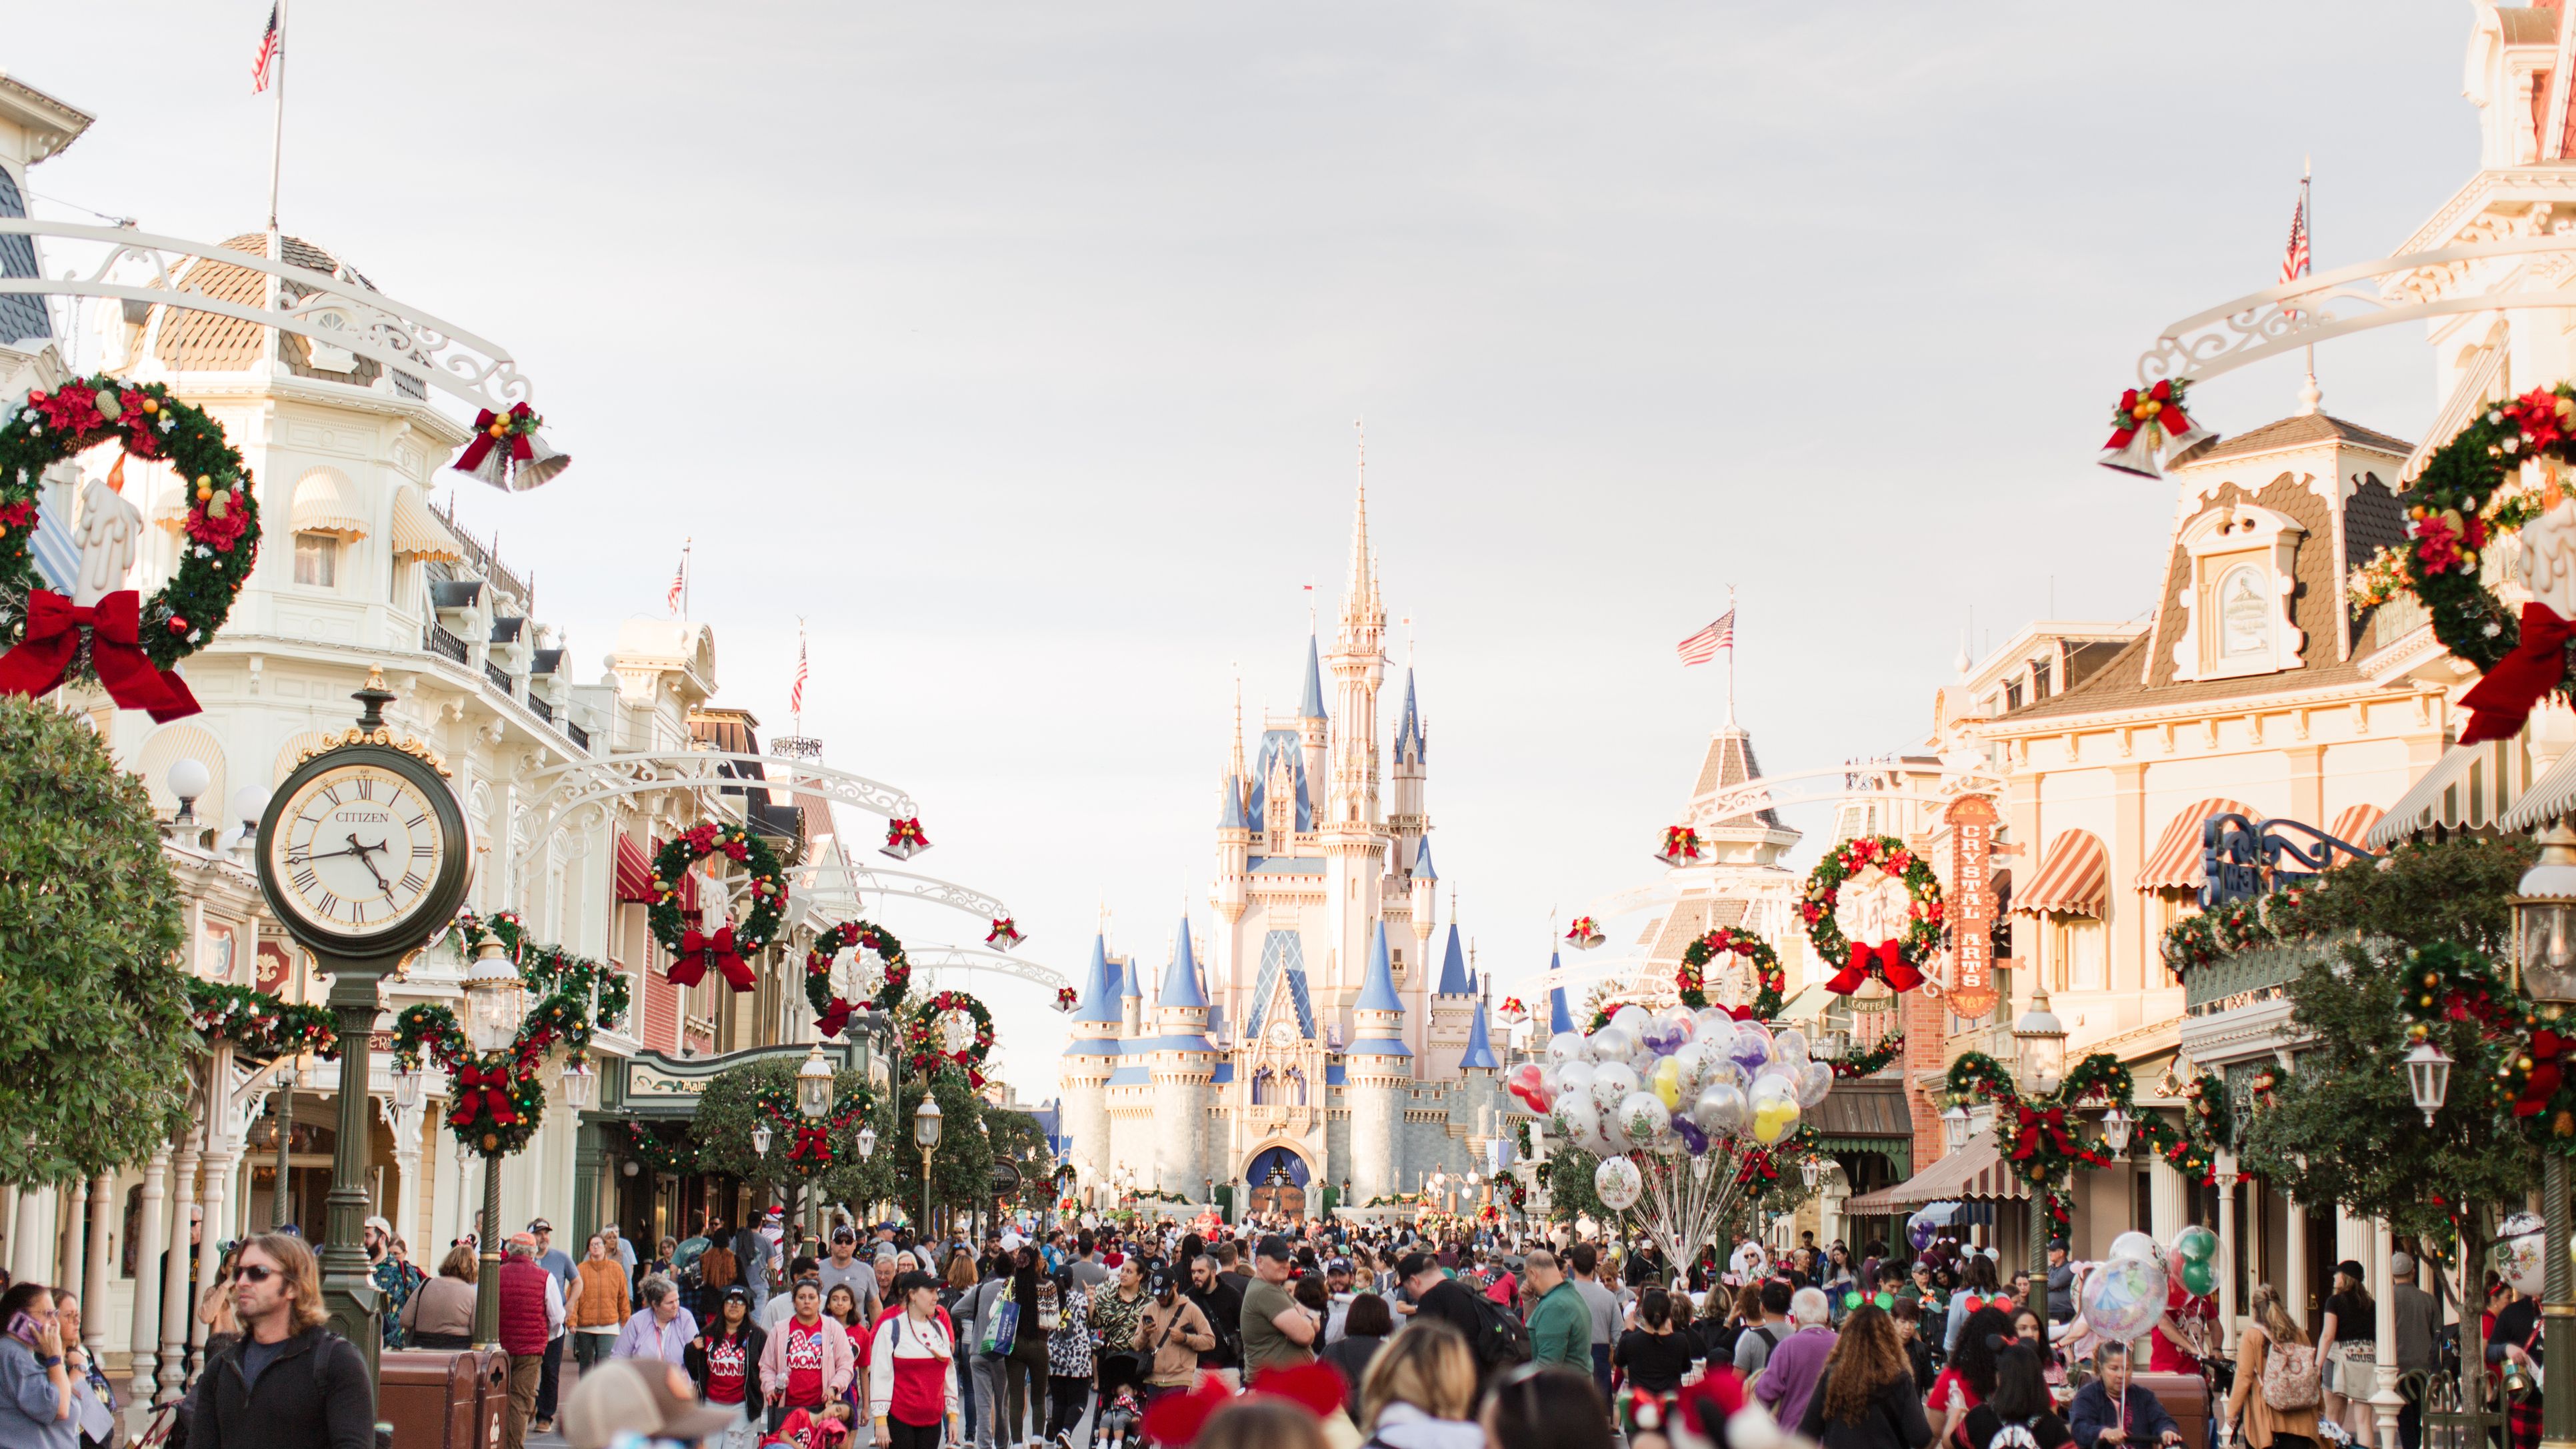 Walt Disney World Florida - Walt Disney World Florida travel guide